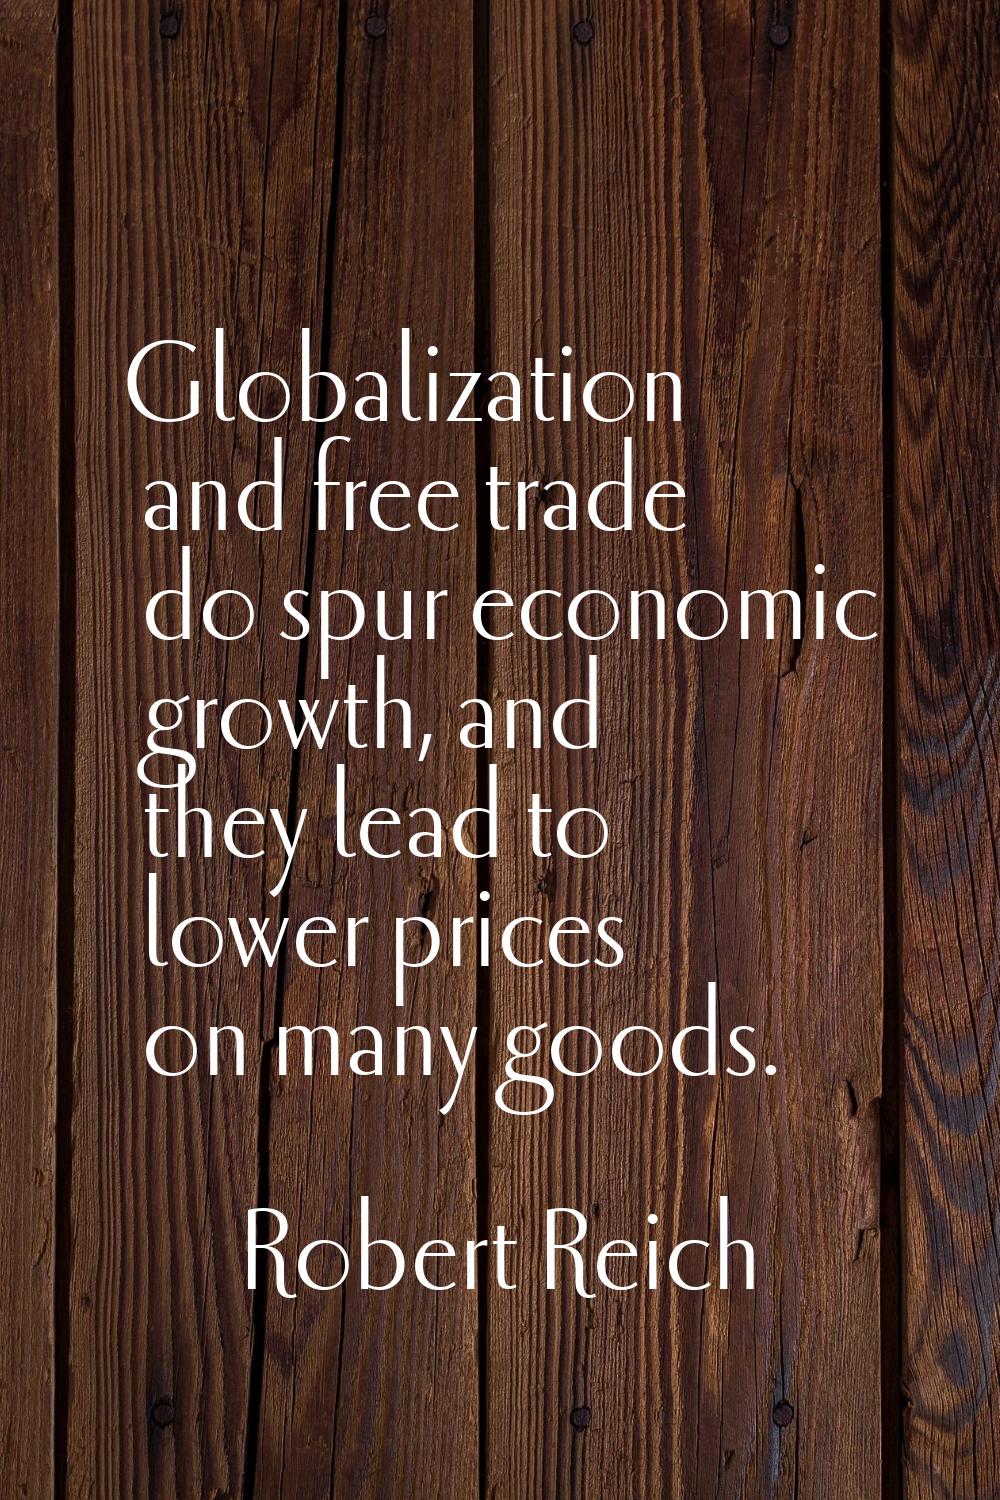 Globalization and free trade do spur economic growth, and they lead to lower prices on many goods.